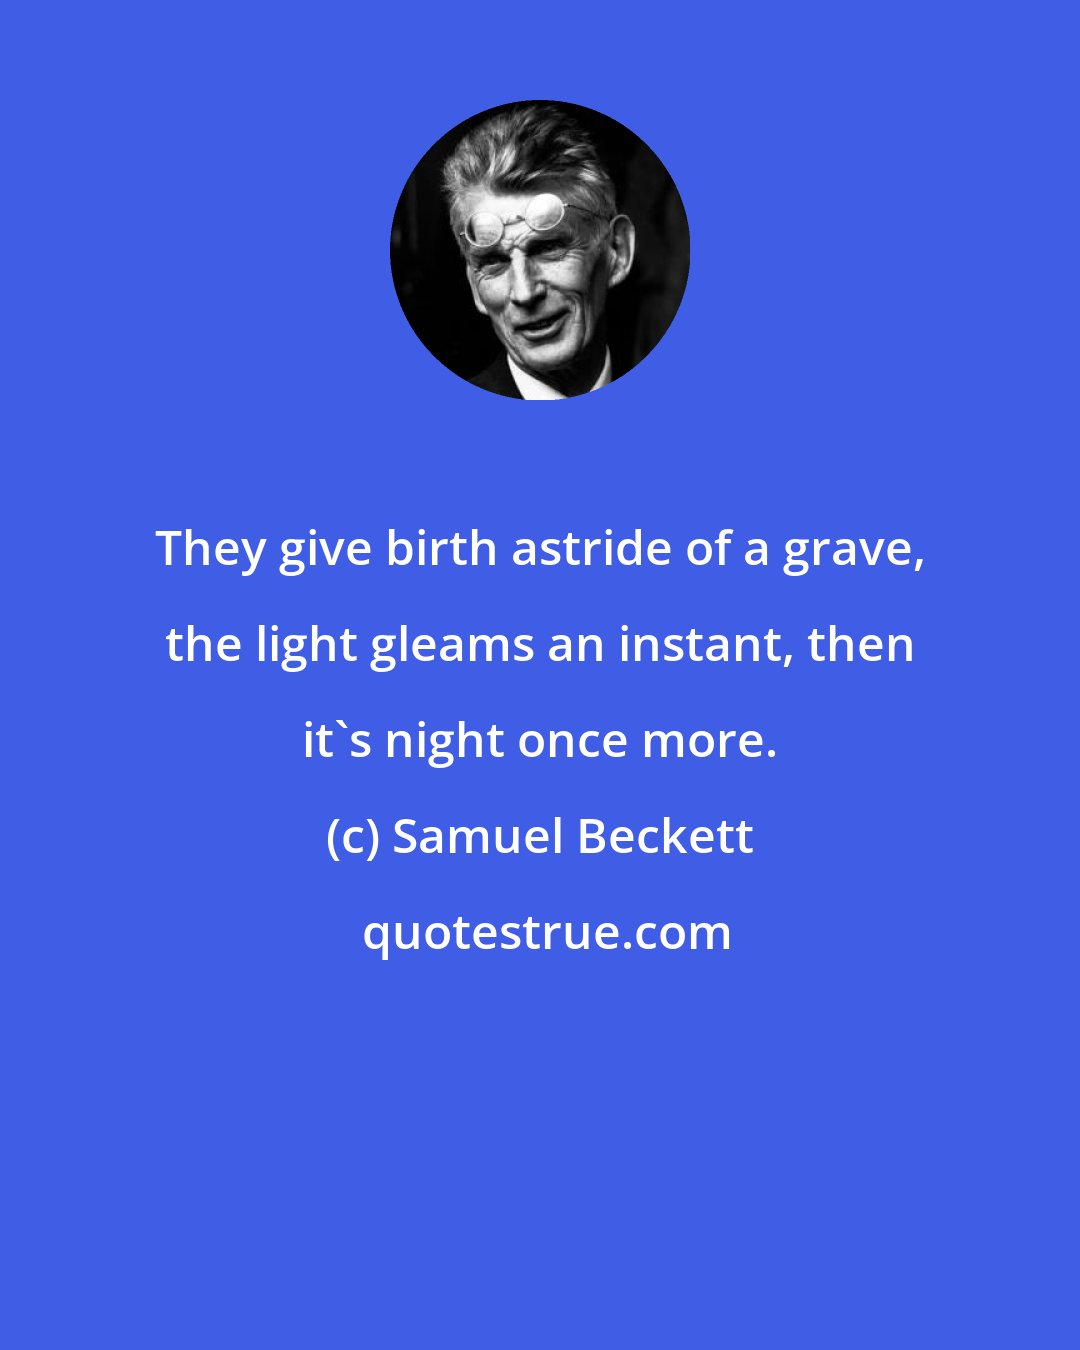 Samuel Beckett: They give birth astride of a grave, the light gleams an instant, then it's night once more.